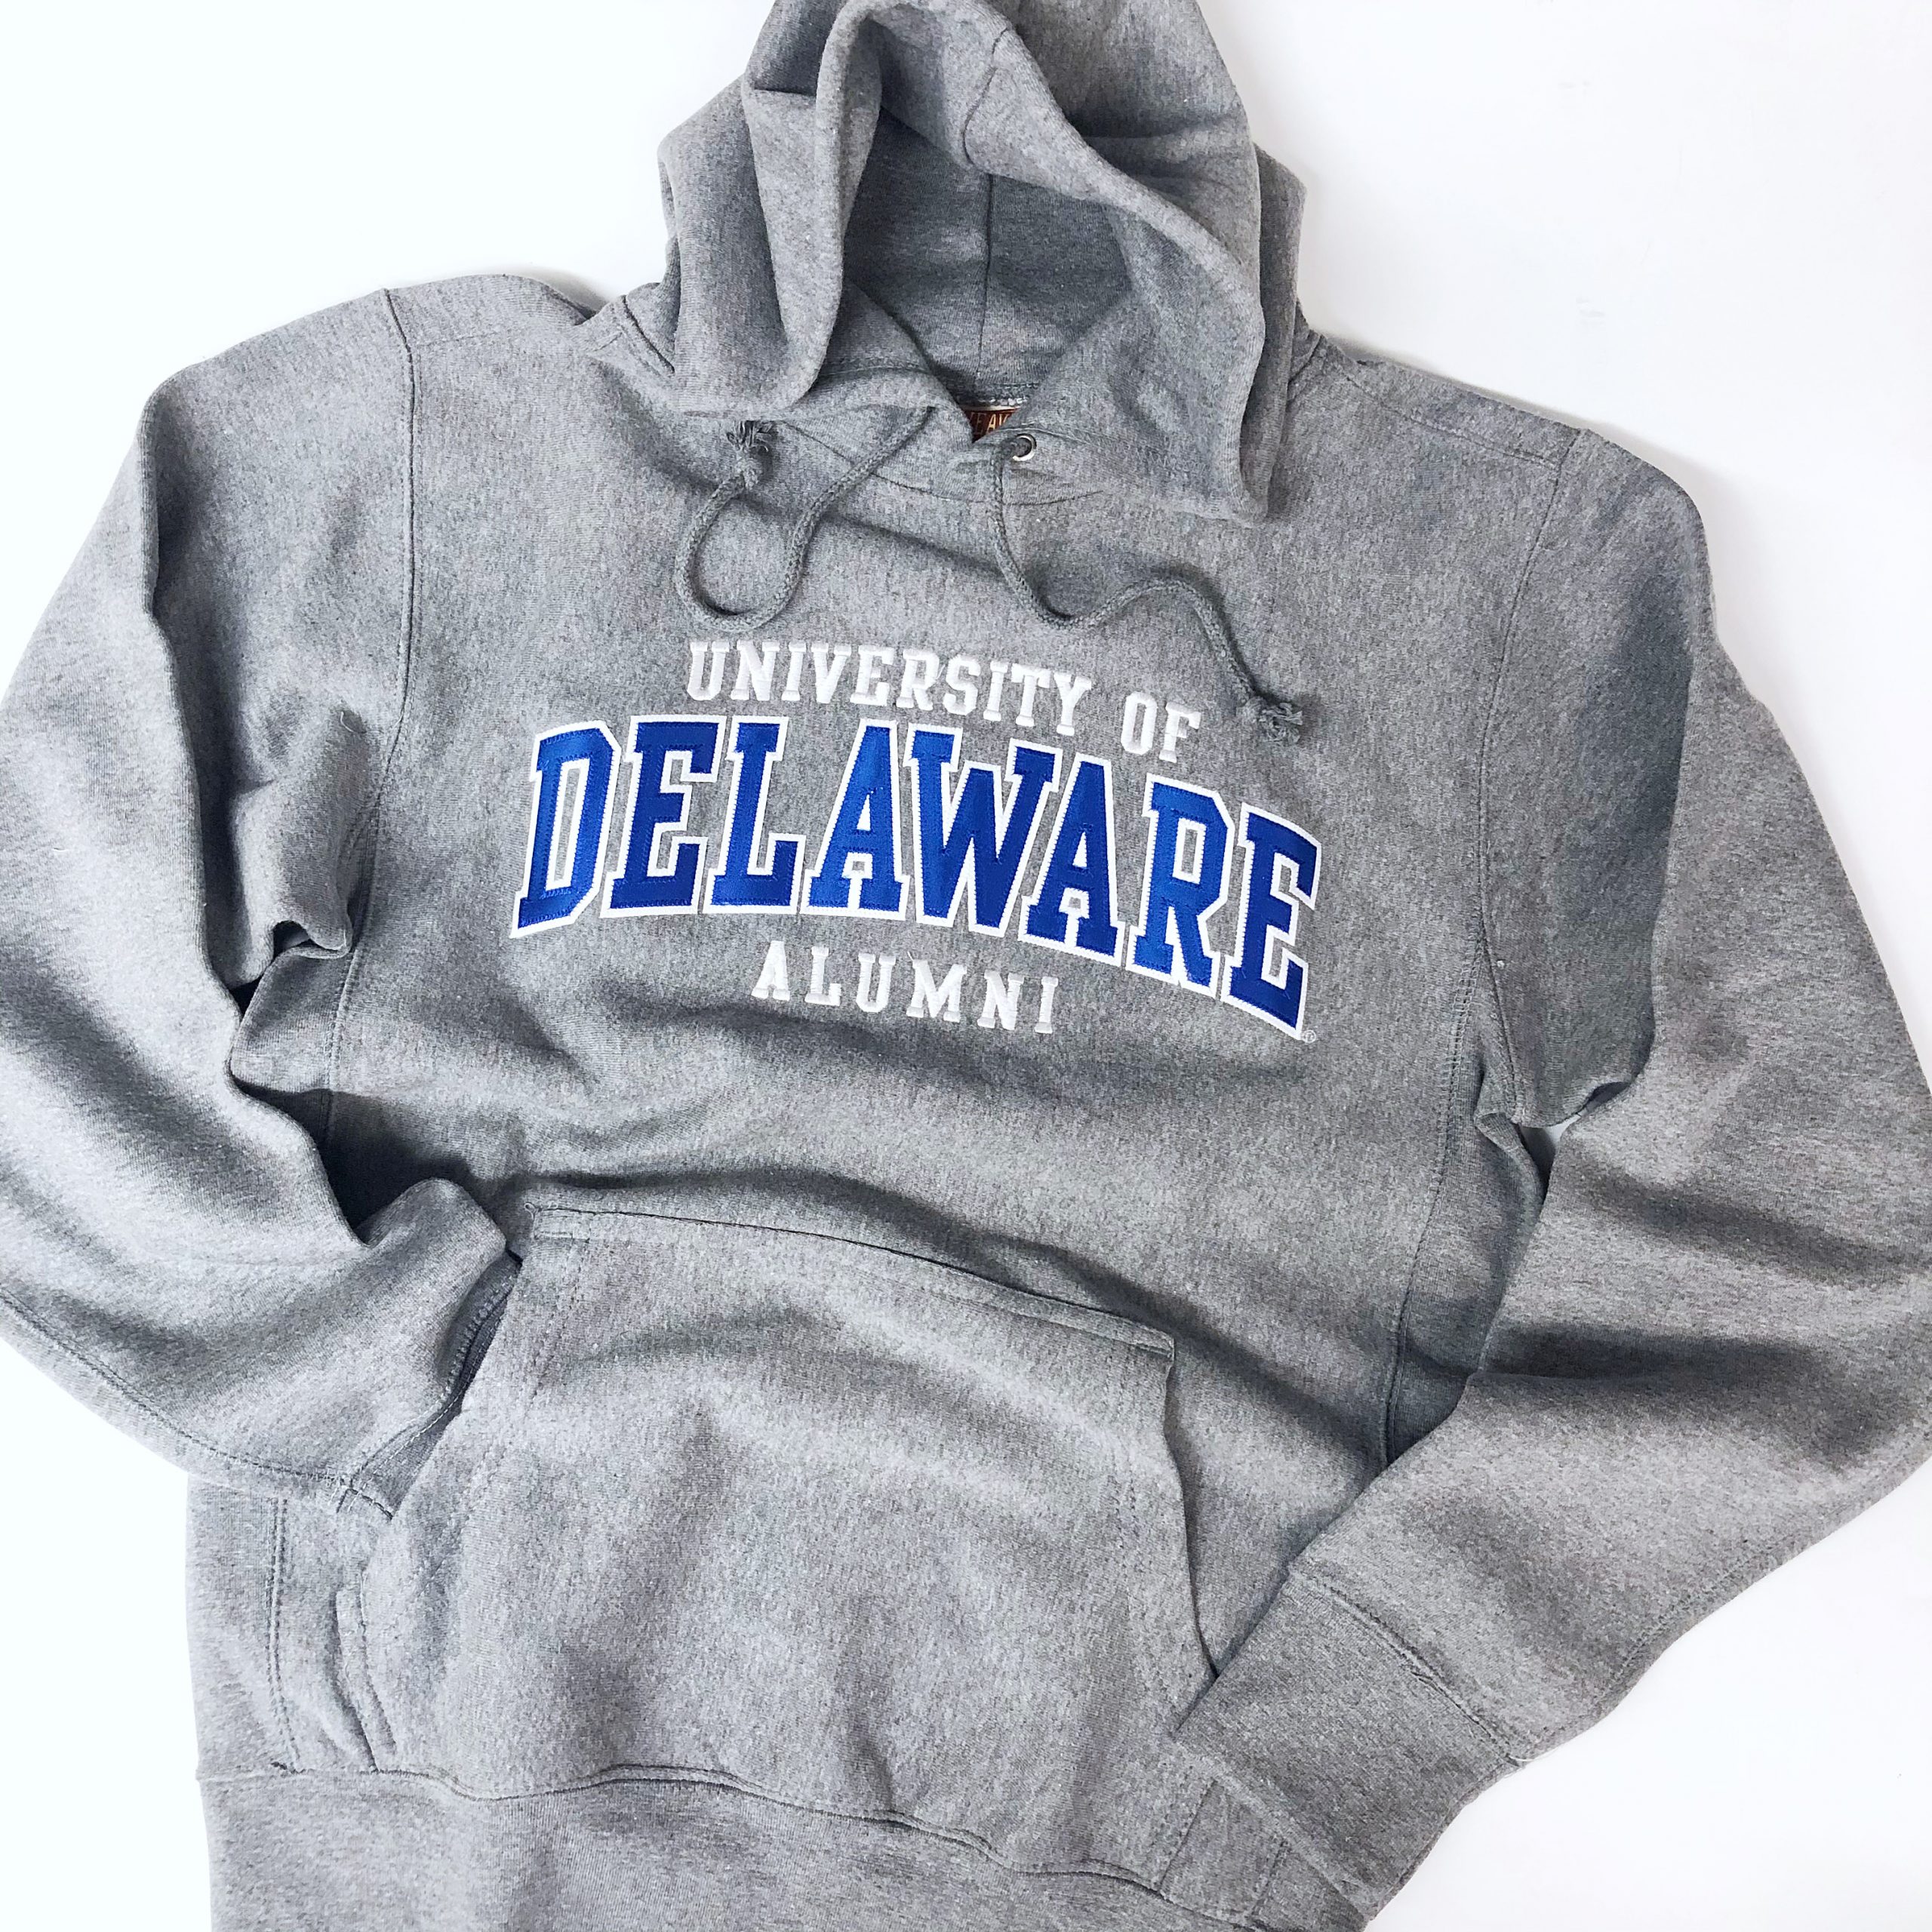  Campus Colors NCAA Adult Tackle Twill Hooded